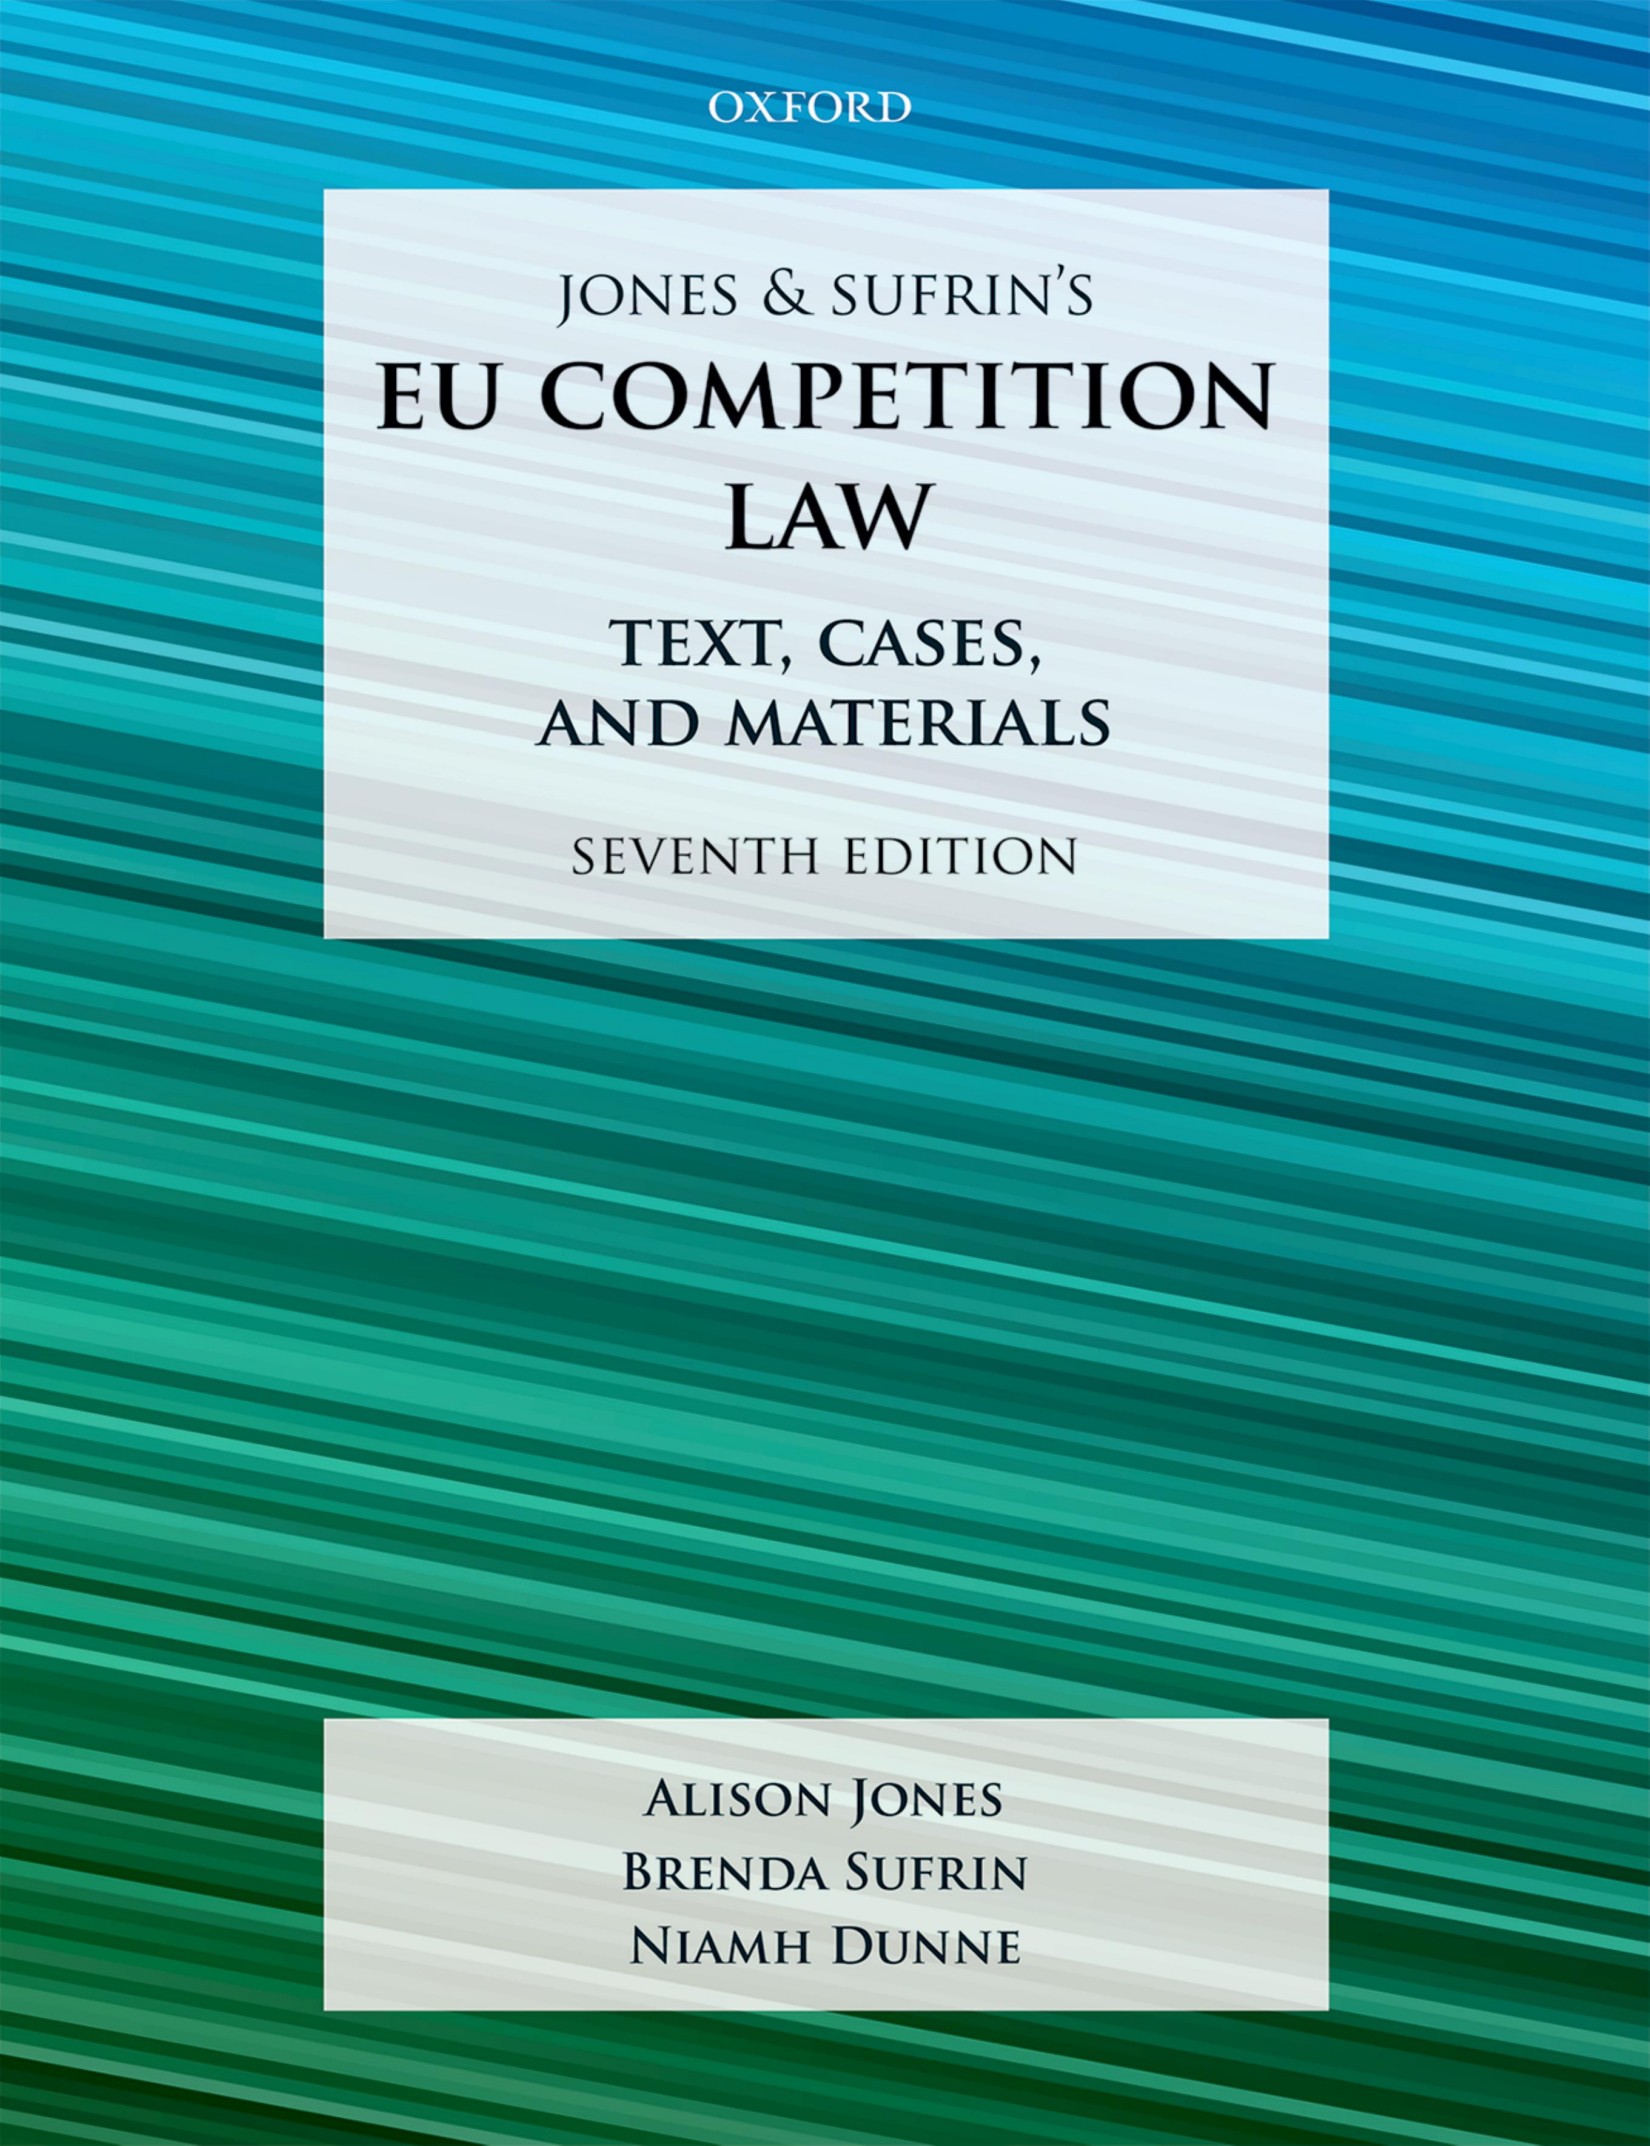 (eBook PDF)Jones & Sufrin's EU Competition Law: Text, Cases, and Materials 7th Edition by Alison Jones,Brenda Sufrin